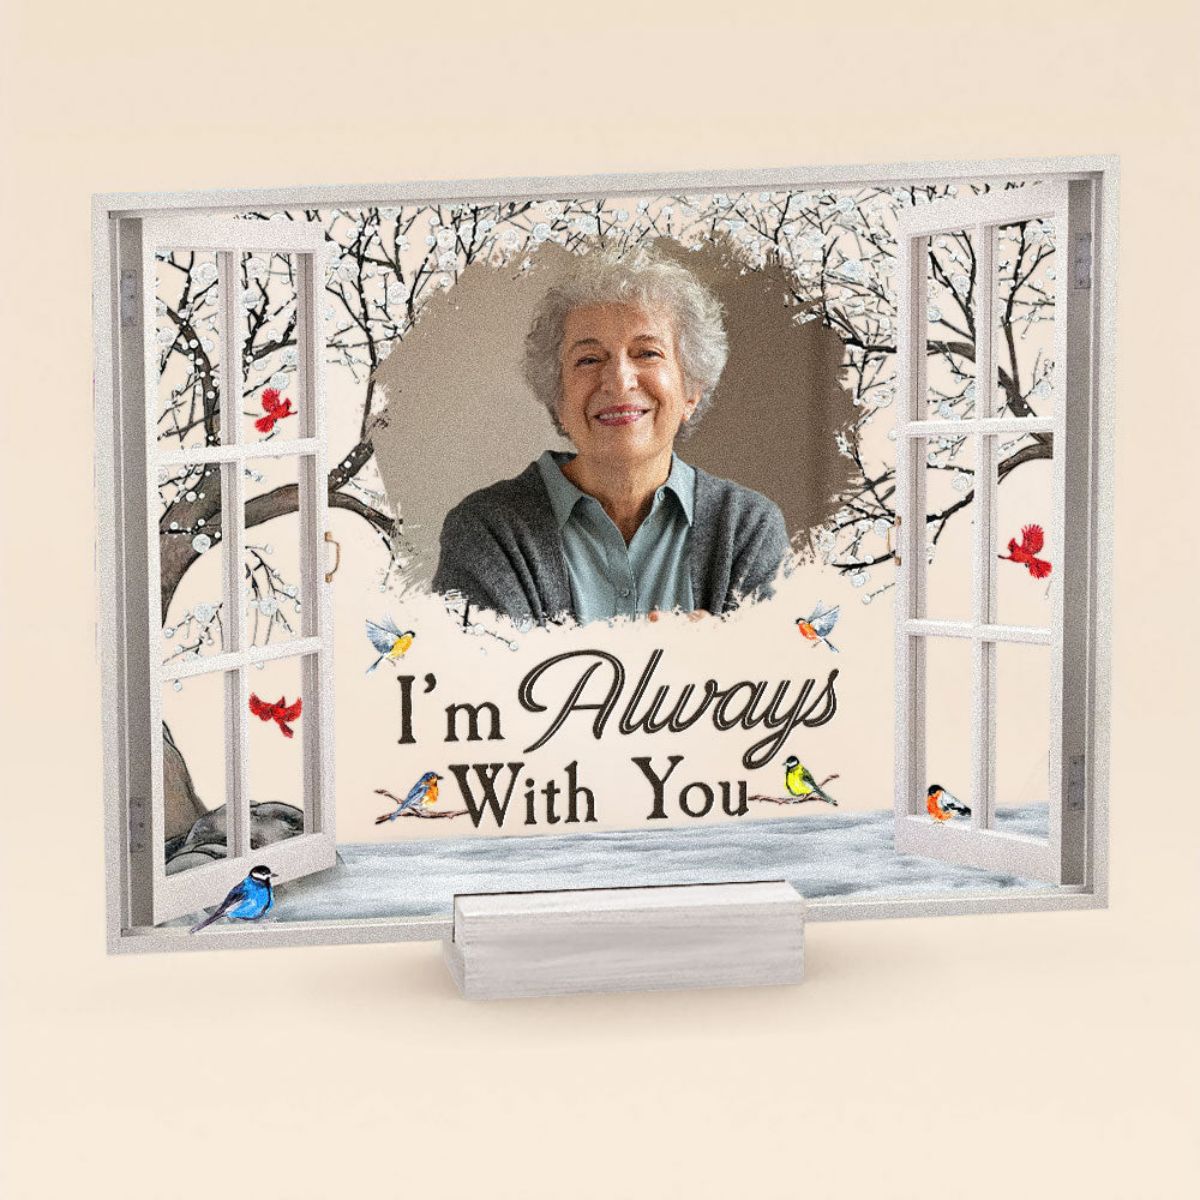 I'm Always With You - Personalized Memorial Photo Acrylic Plaque